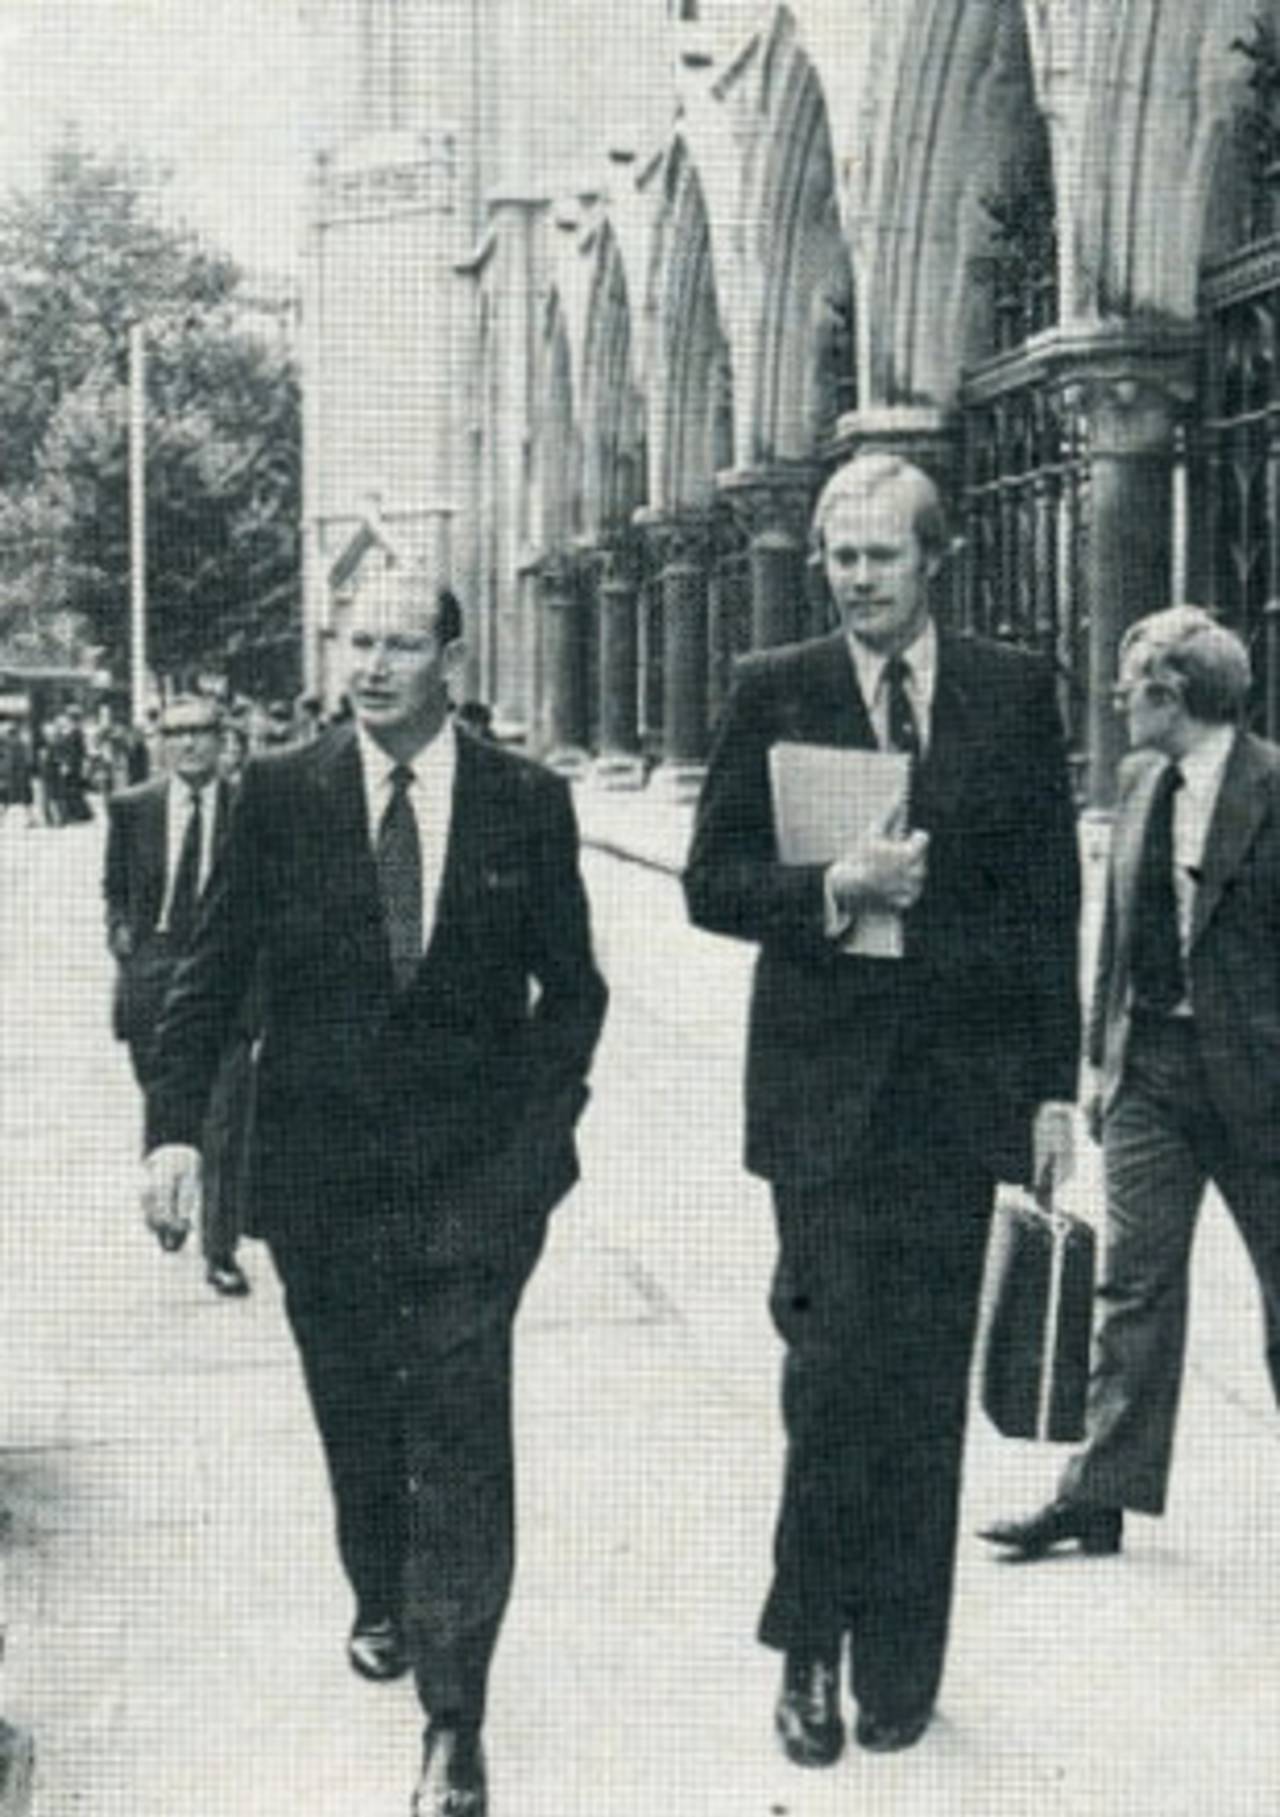 Tony Greig and Kerry Packer arrive at the High Court on the first day of the hearing, London, September 26, 1977